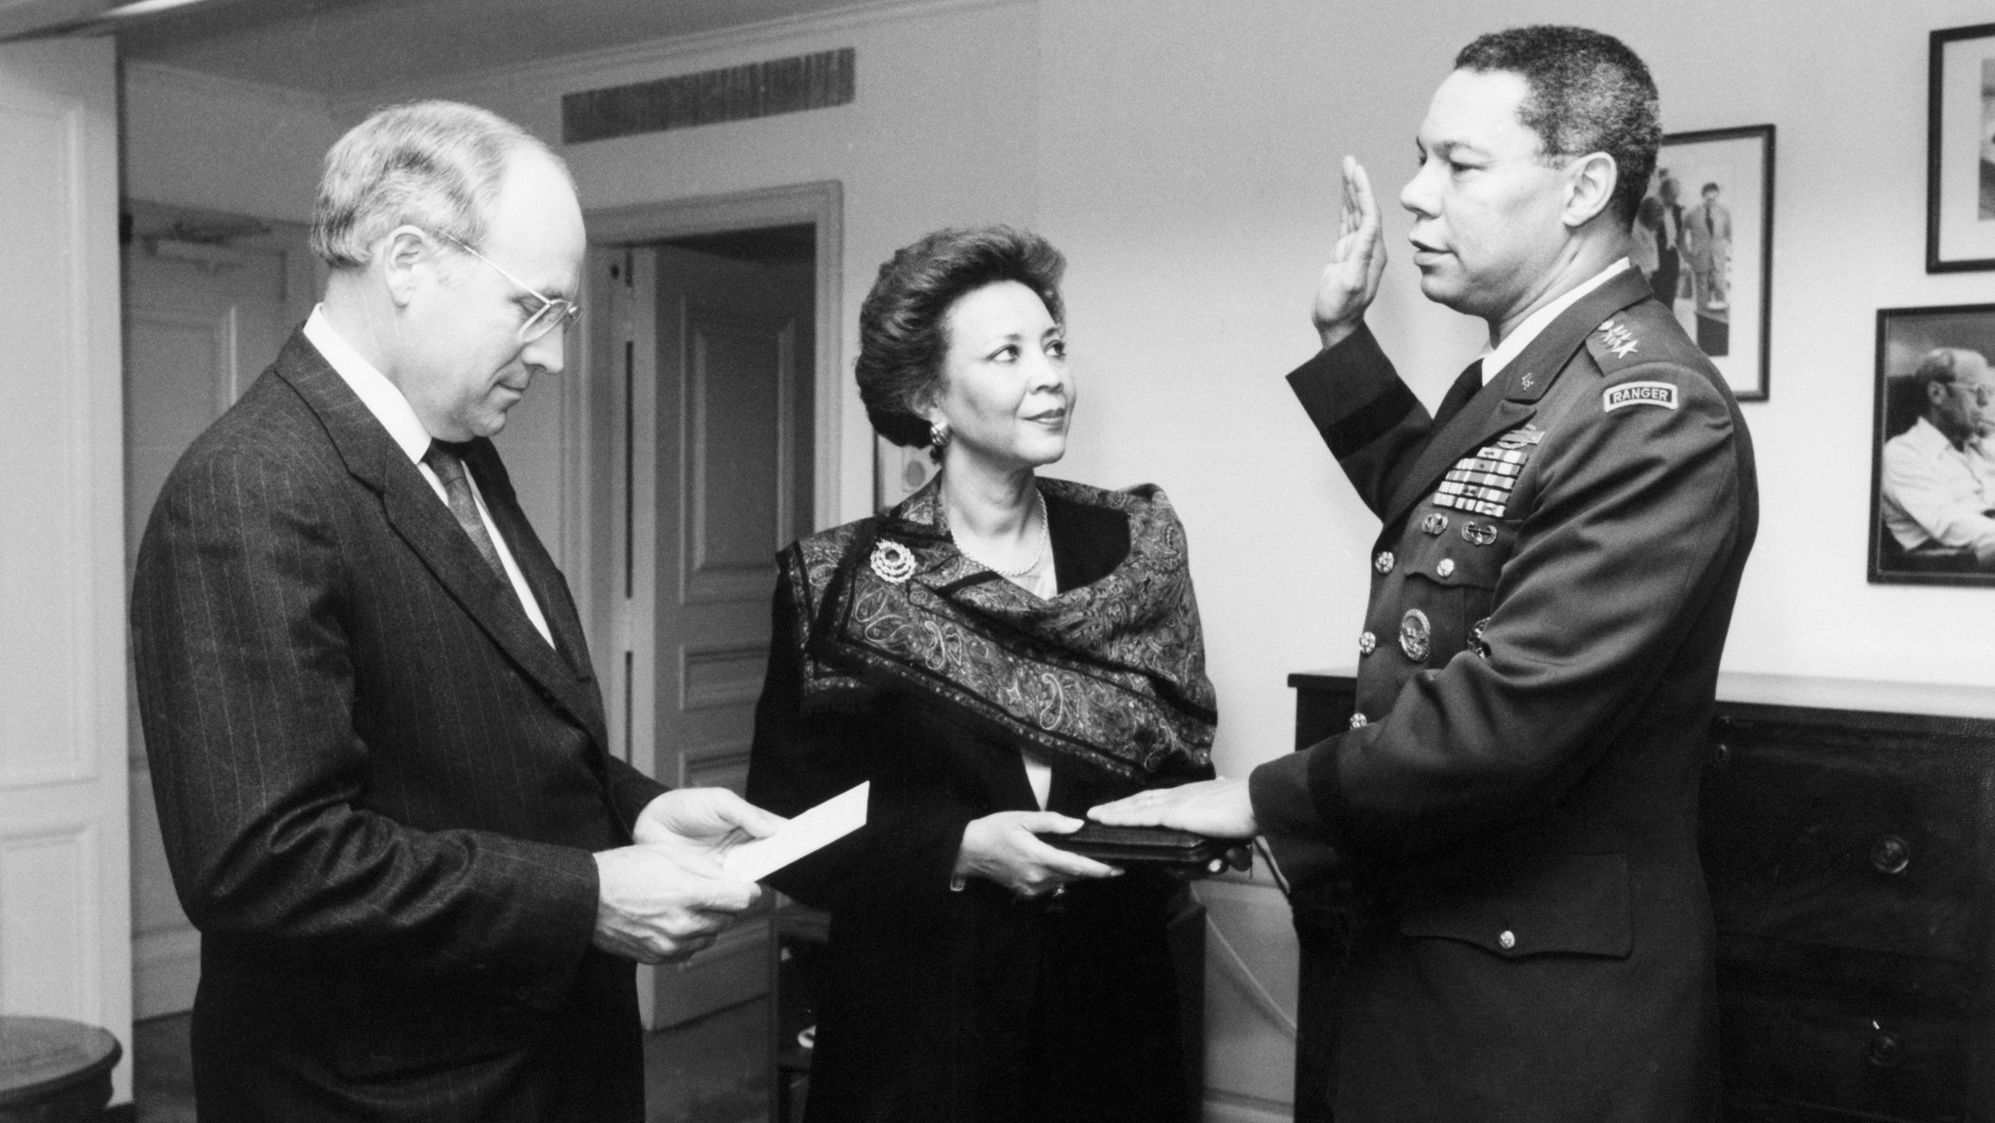 Secretary of Defense Dick Cheney administers the oath of office to Gen. Colin Powell as the chairman of the Joint Chiefs of Staff as Alma Powell holds the Bible.